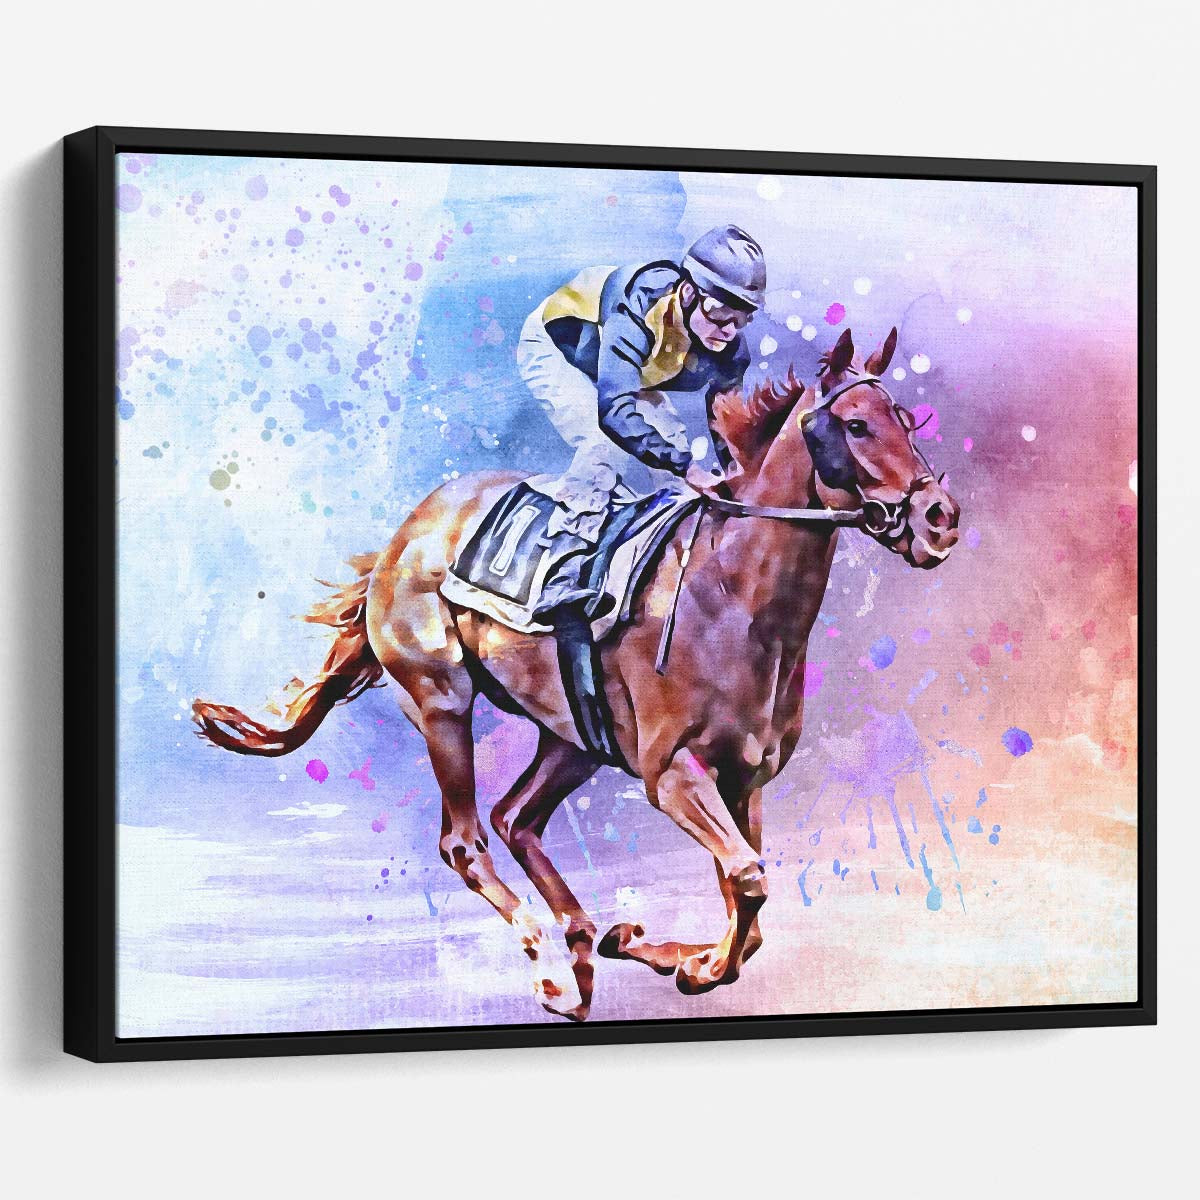 Horse Racing Gallop Watercolor Painting Wall Art by Luxuriance Designs. Made in USA.